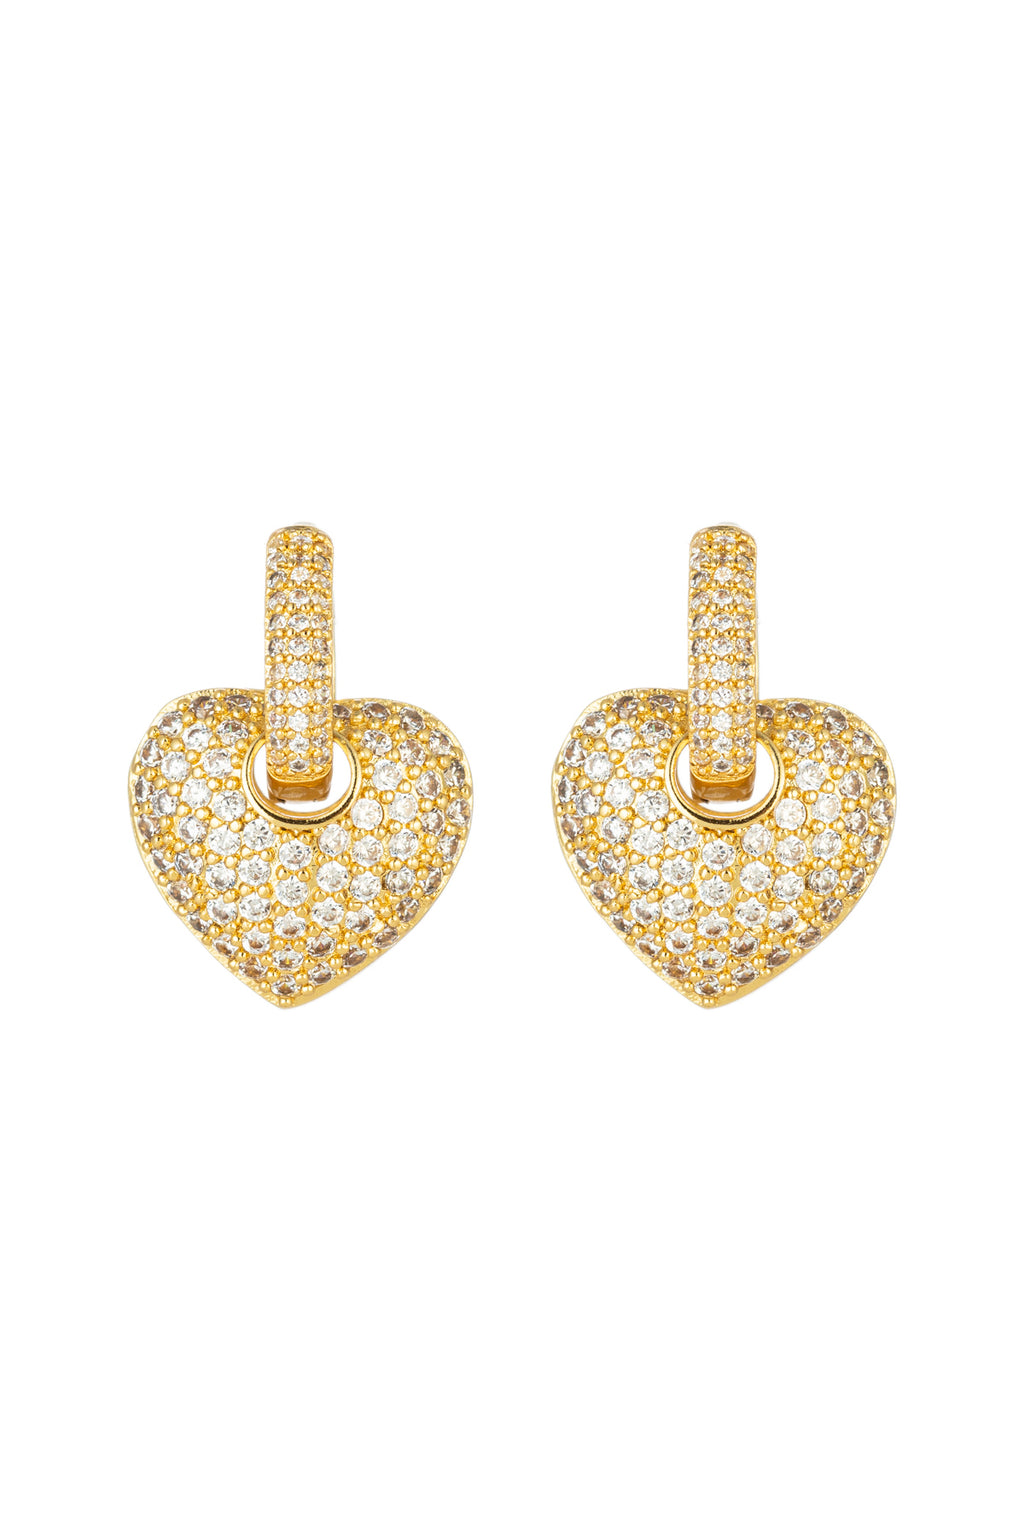 Golden hearts huggie earrings with CZ crystals.